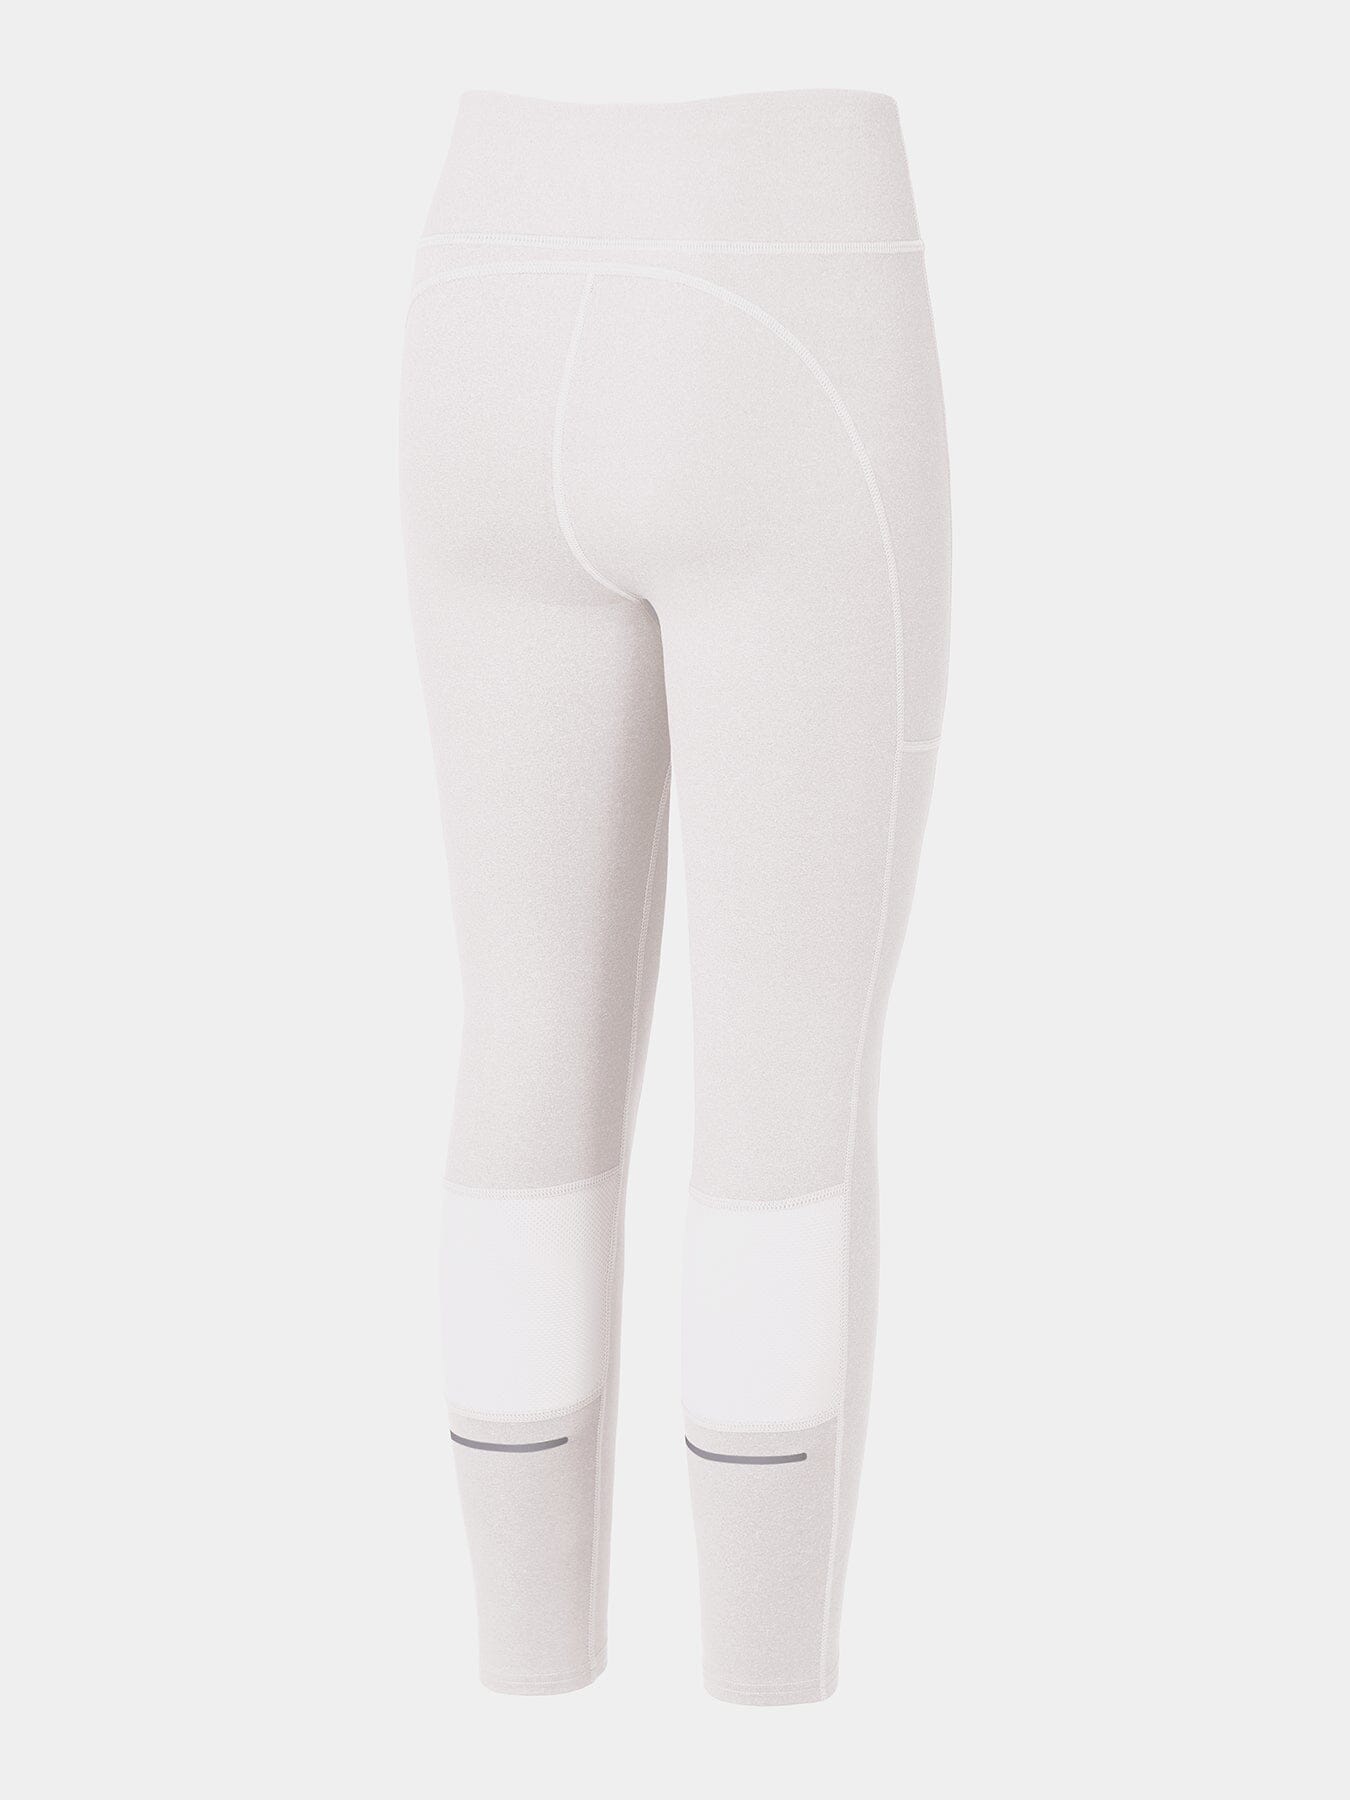 SuperThermal Compression Base Layer Tights for Girls With Brushed Inner Fabric